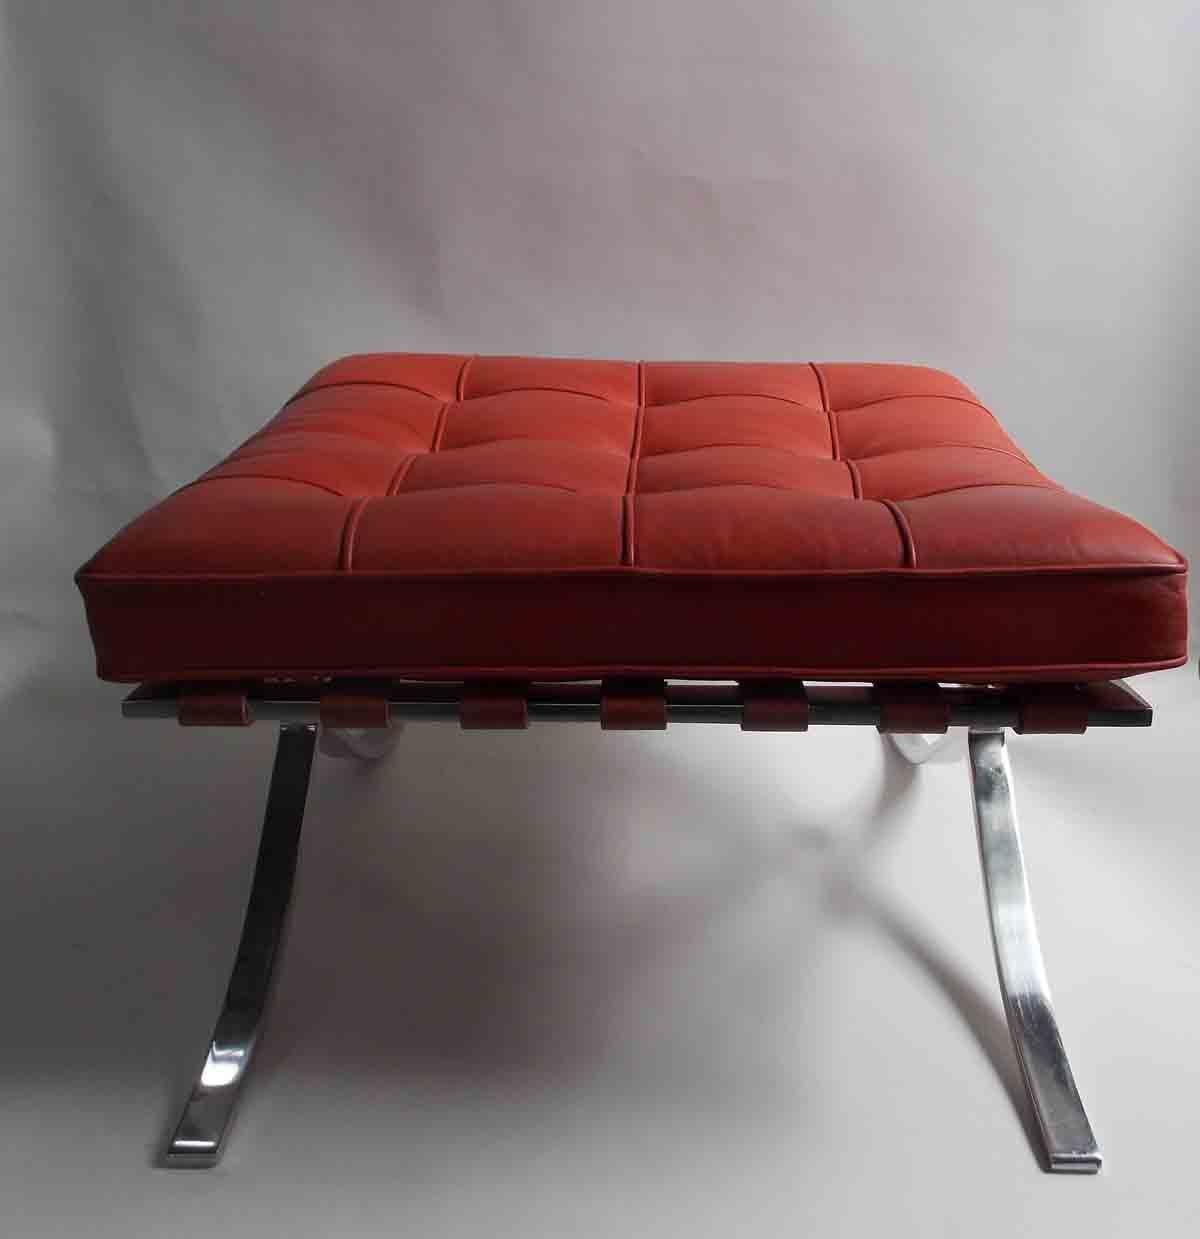 Red Barcelona Ottoman manufactured by knoll 
See photo with Hermes Orange Handbag to 
give you a sense of color
label present.
 